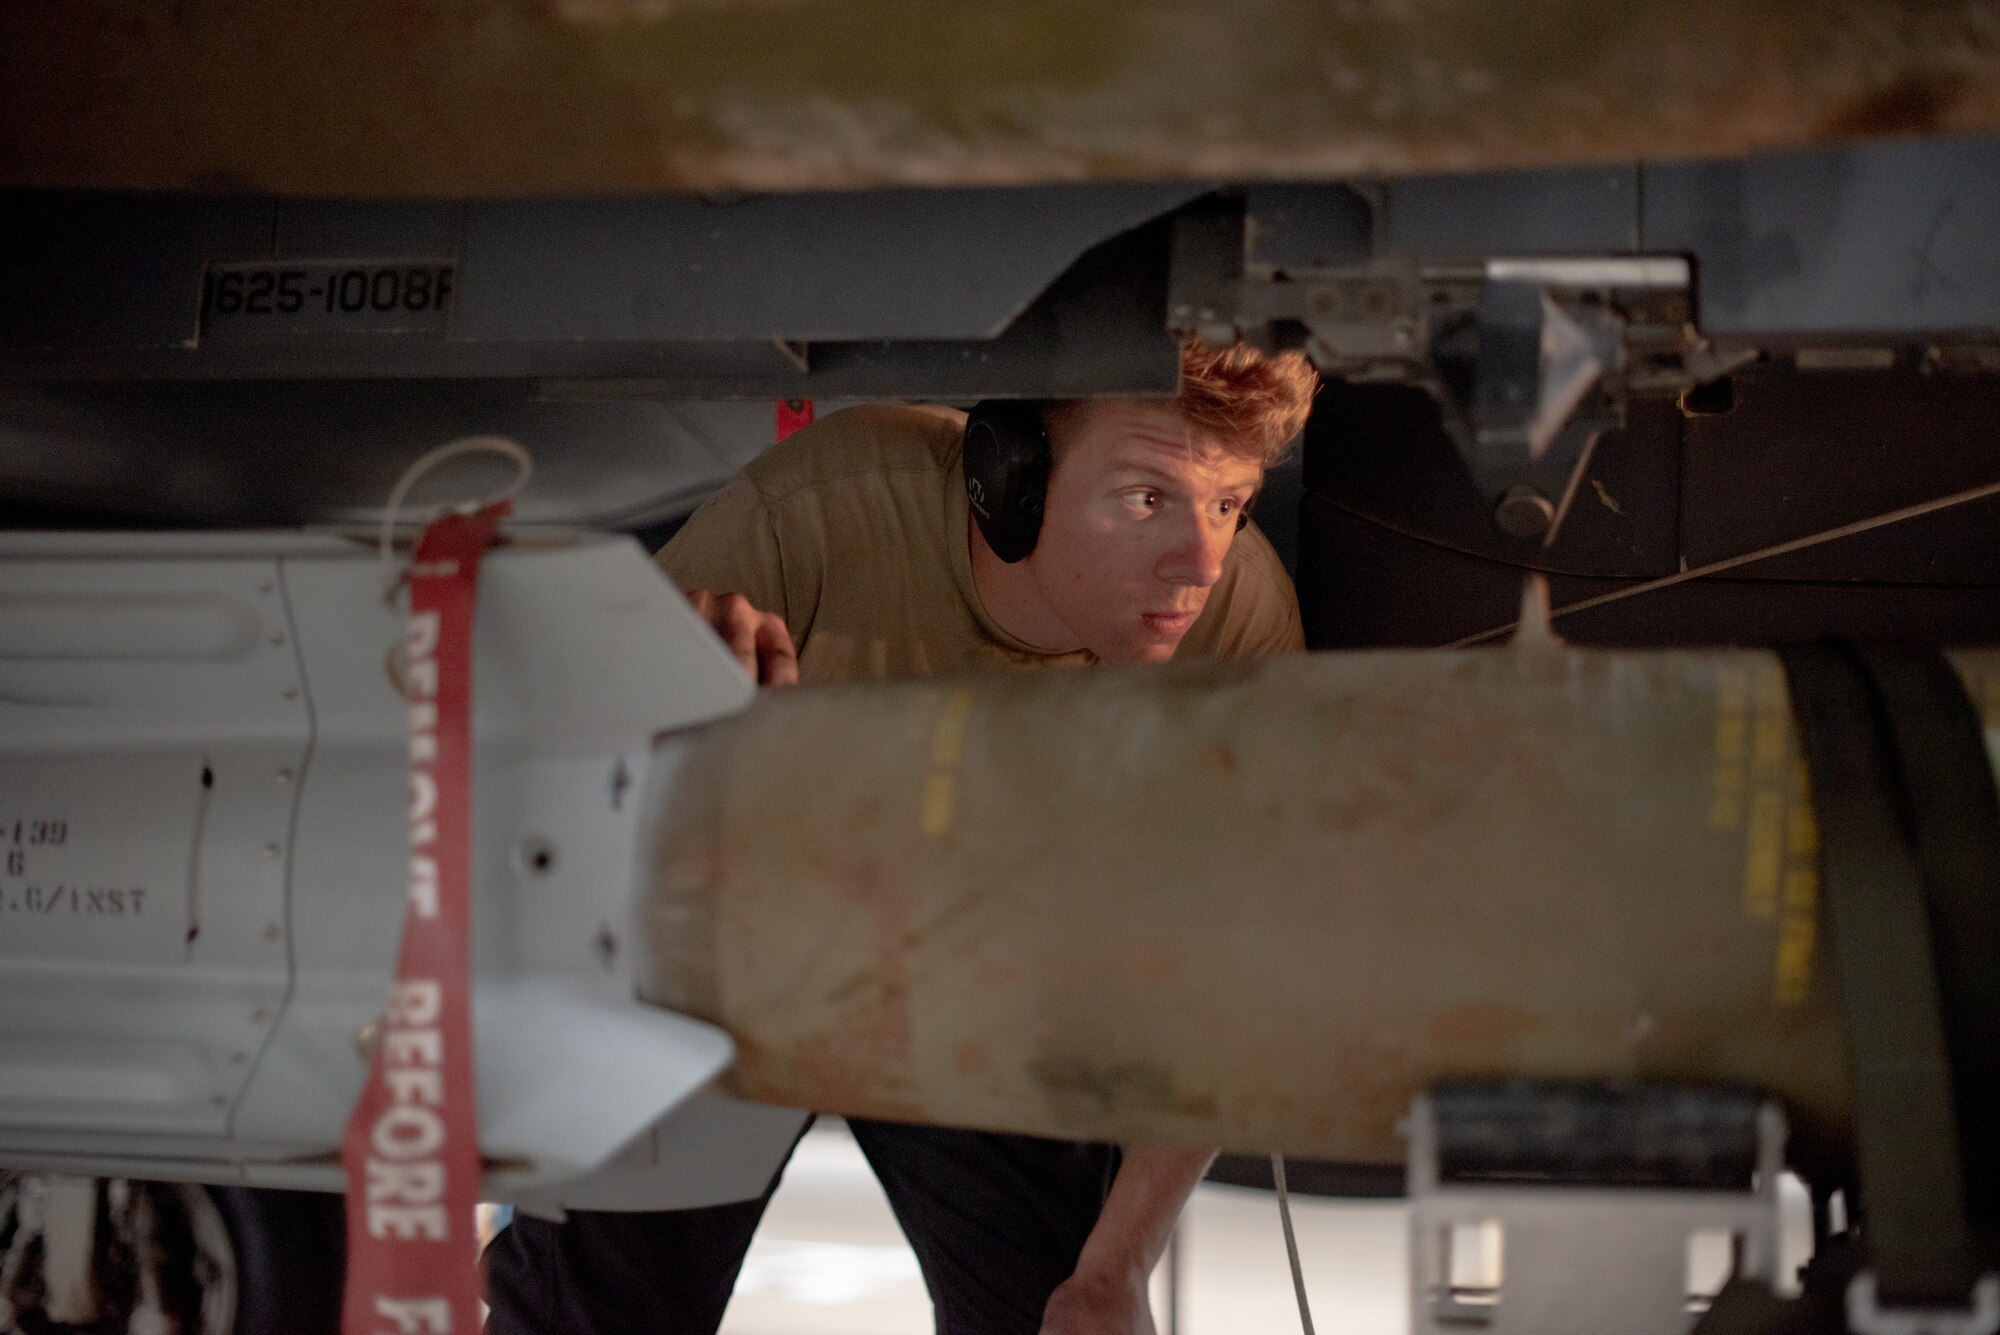 Senior Airman Sean Logan, 380th Expeditionary Aircraft Maintenance Squadron weapons load crew team member, watches a lift driver move a munition under an F-15E Strike Eagle July 15, 2019, at Al Dhafra Air Base, United Arab Emirates. The F-15E has the capability to carry any air-to-surface weapon in the Air Force inventory. (U.S. Air Force photo by Staff Sgt. Chris Thornbury)